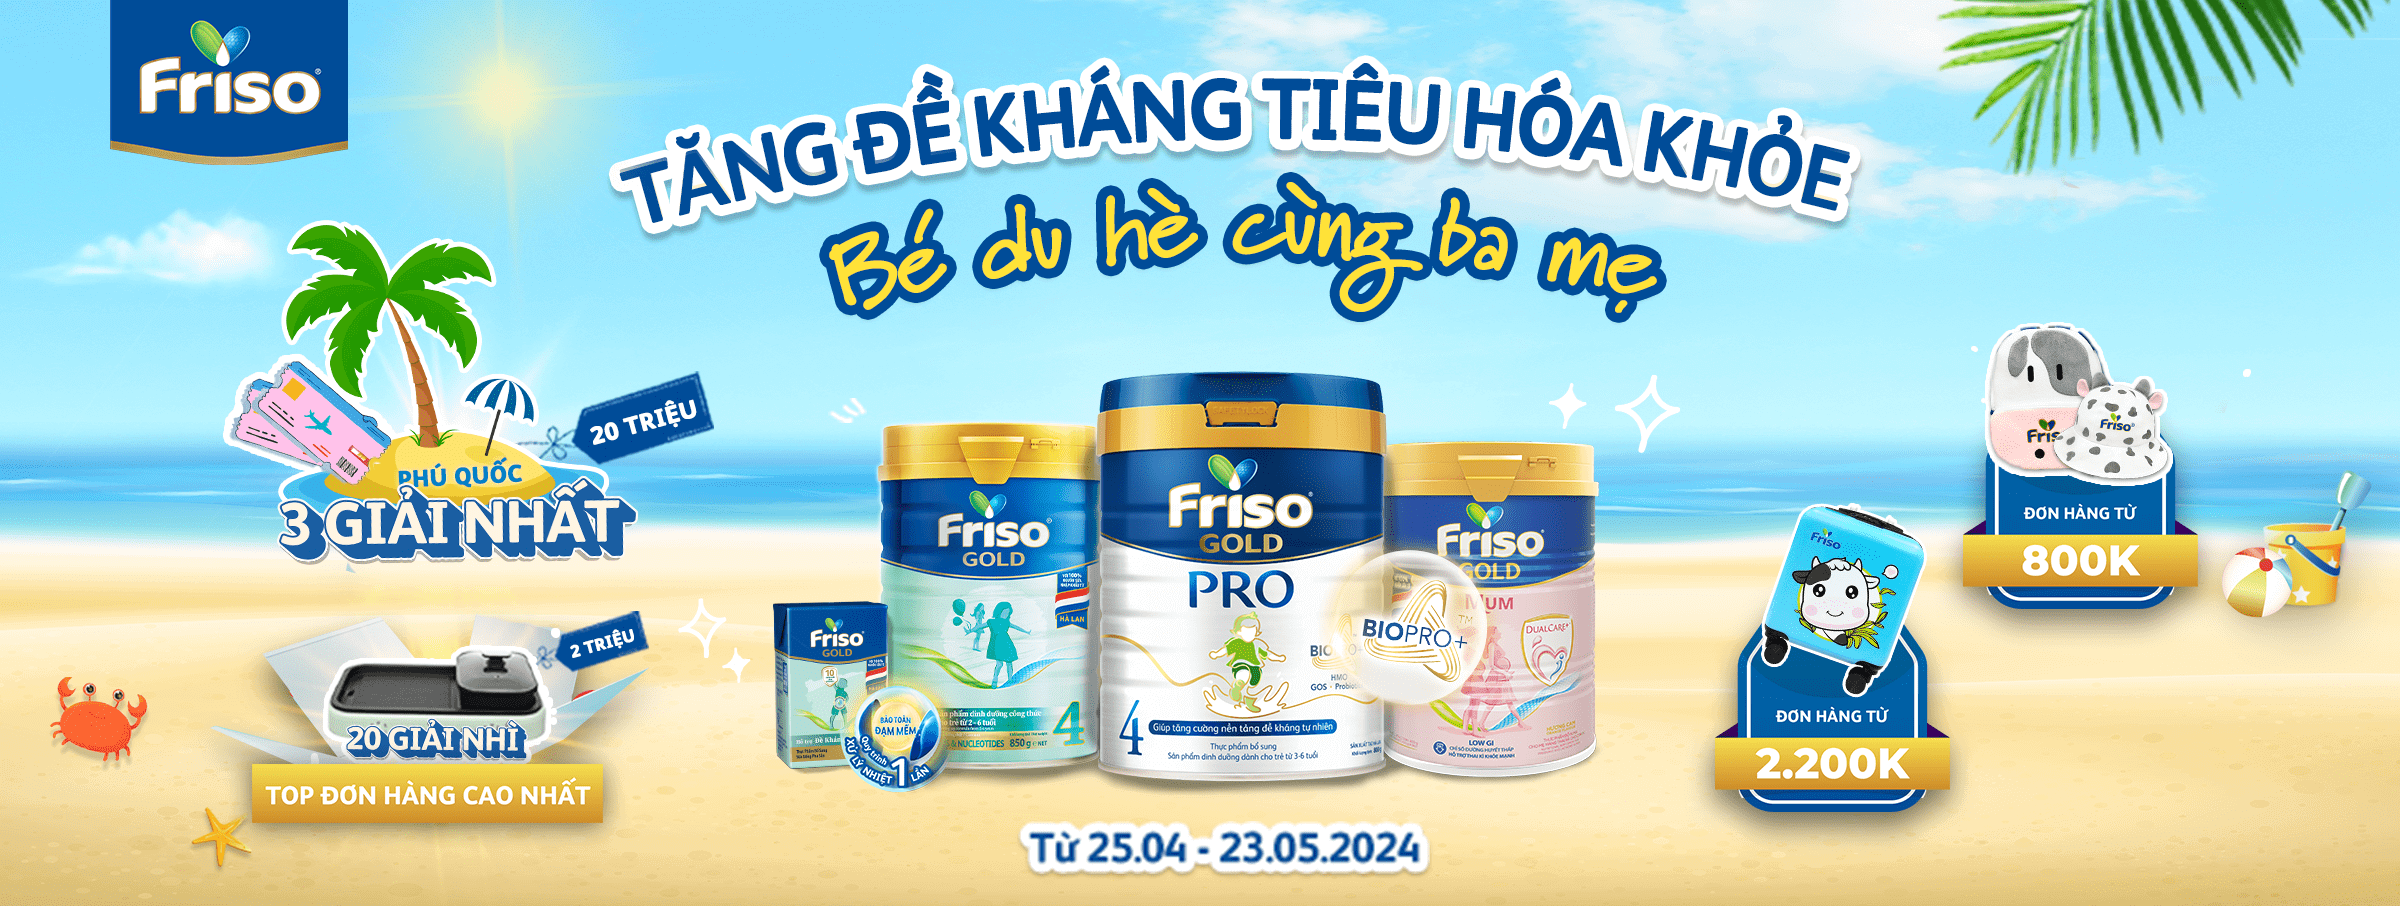 Friso Brand Camp - SIS - T05